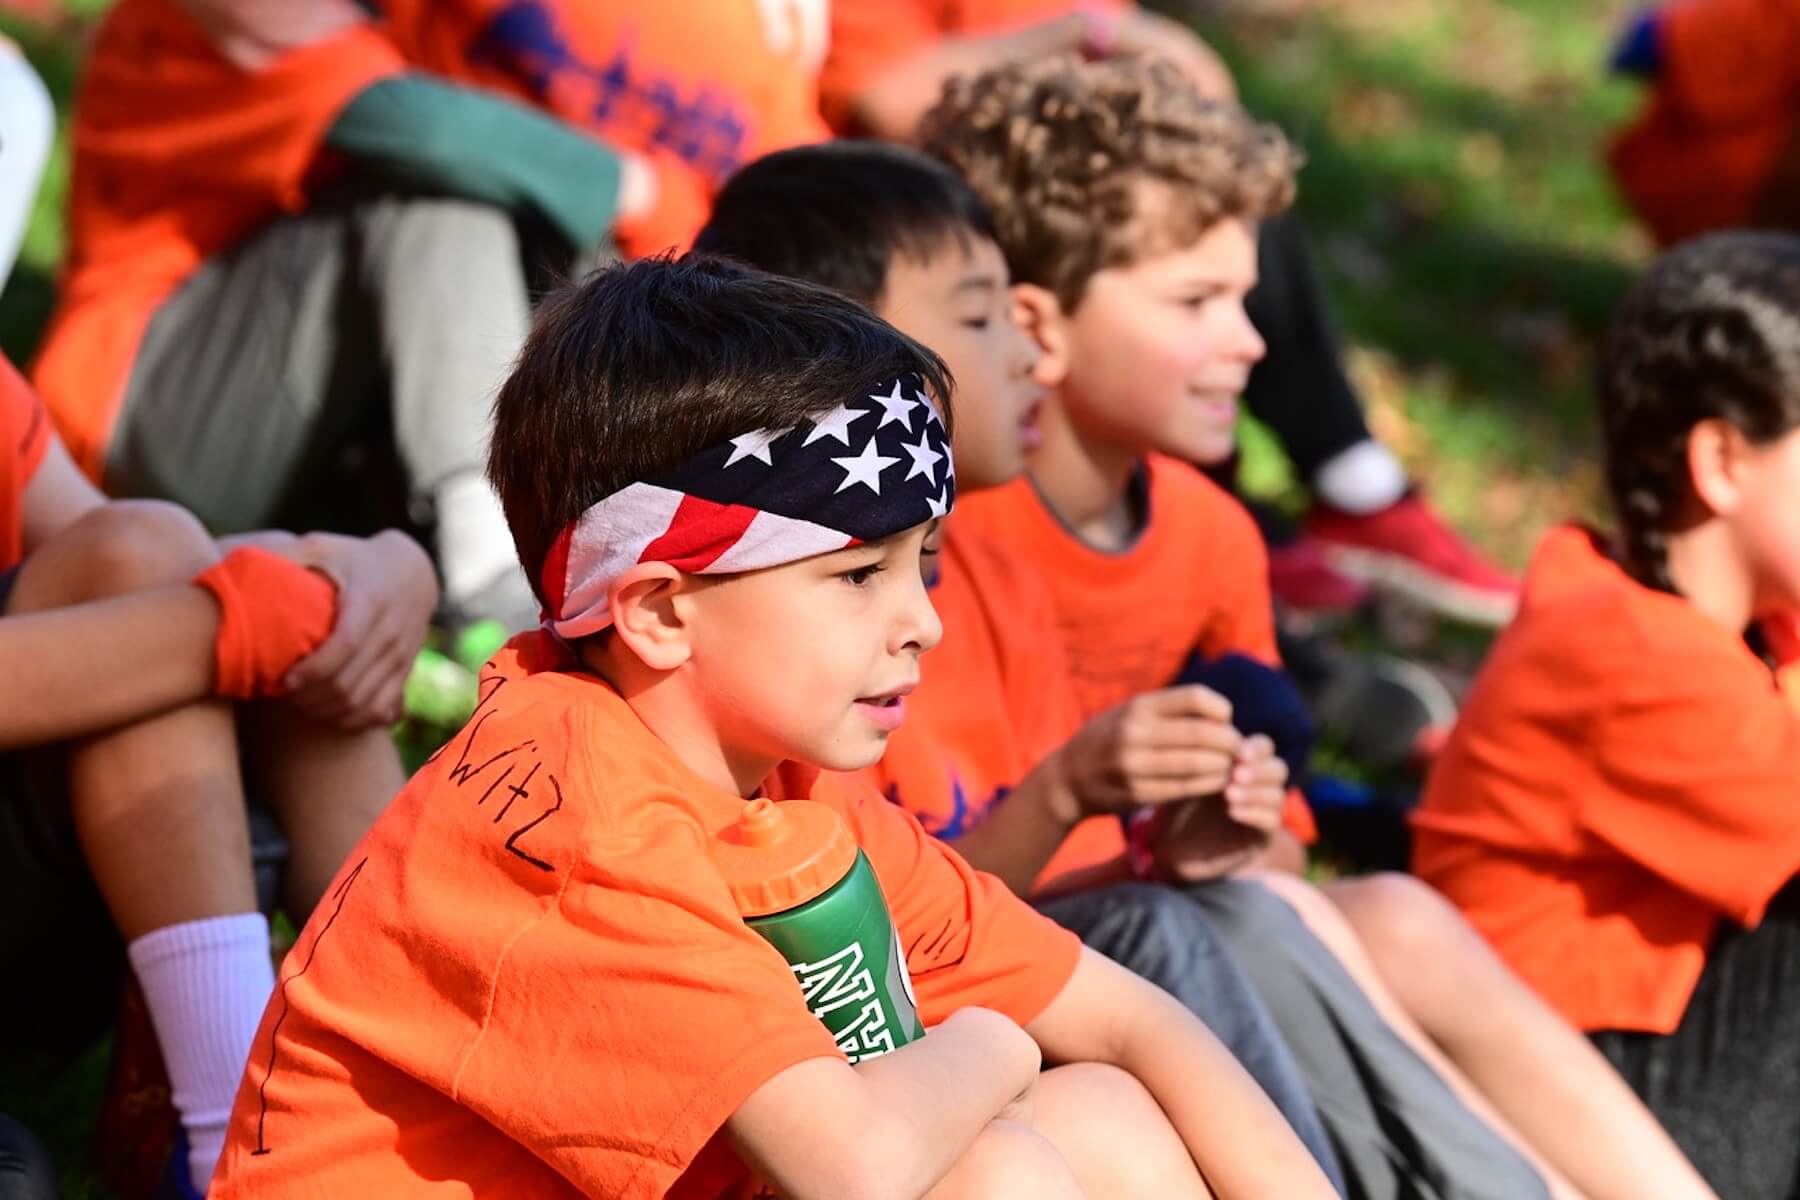 Student sits with his water bottle wearing orange shirt and red, white, and blue bandana.